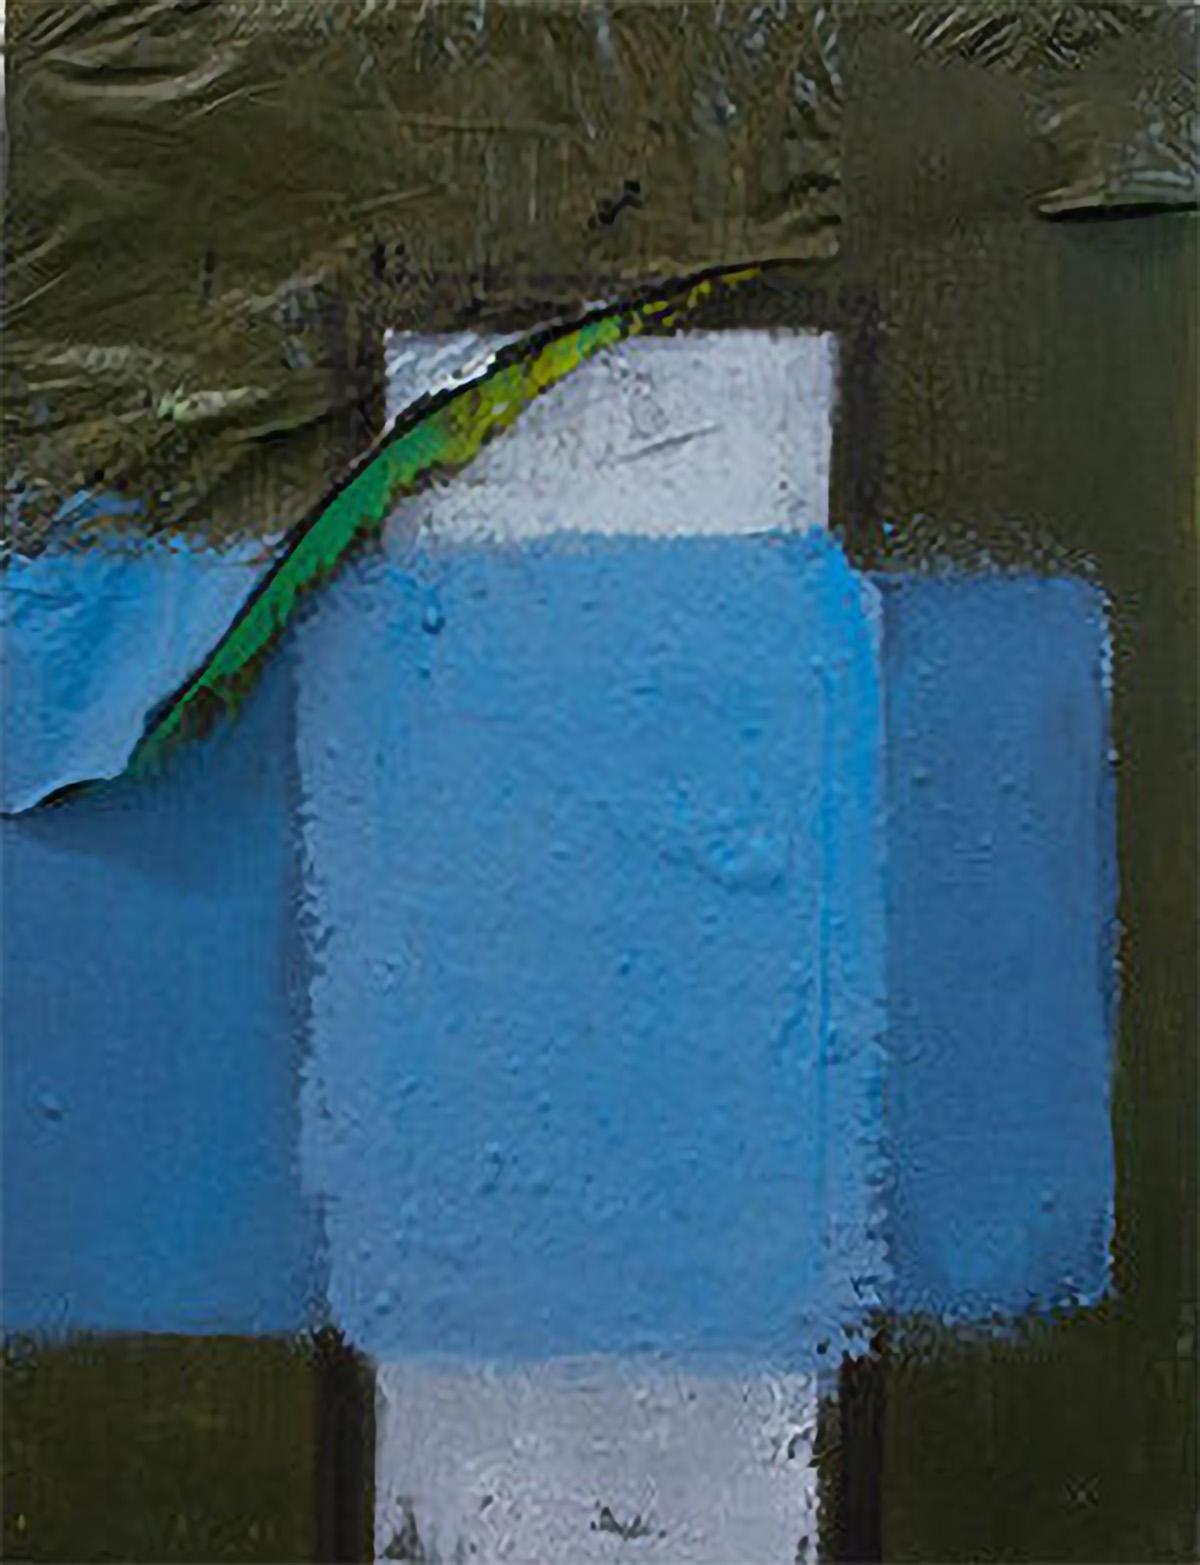 Francesca Reyes Abstract Painting - "Door #6 (Tarp)" Oil on panel, textured abstract urban architecture painting